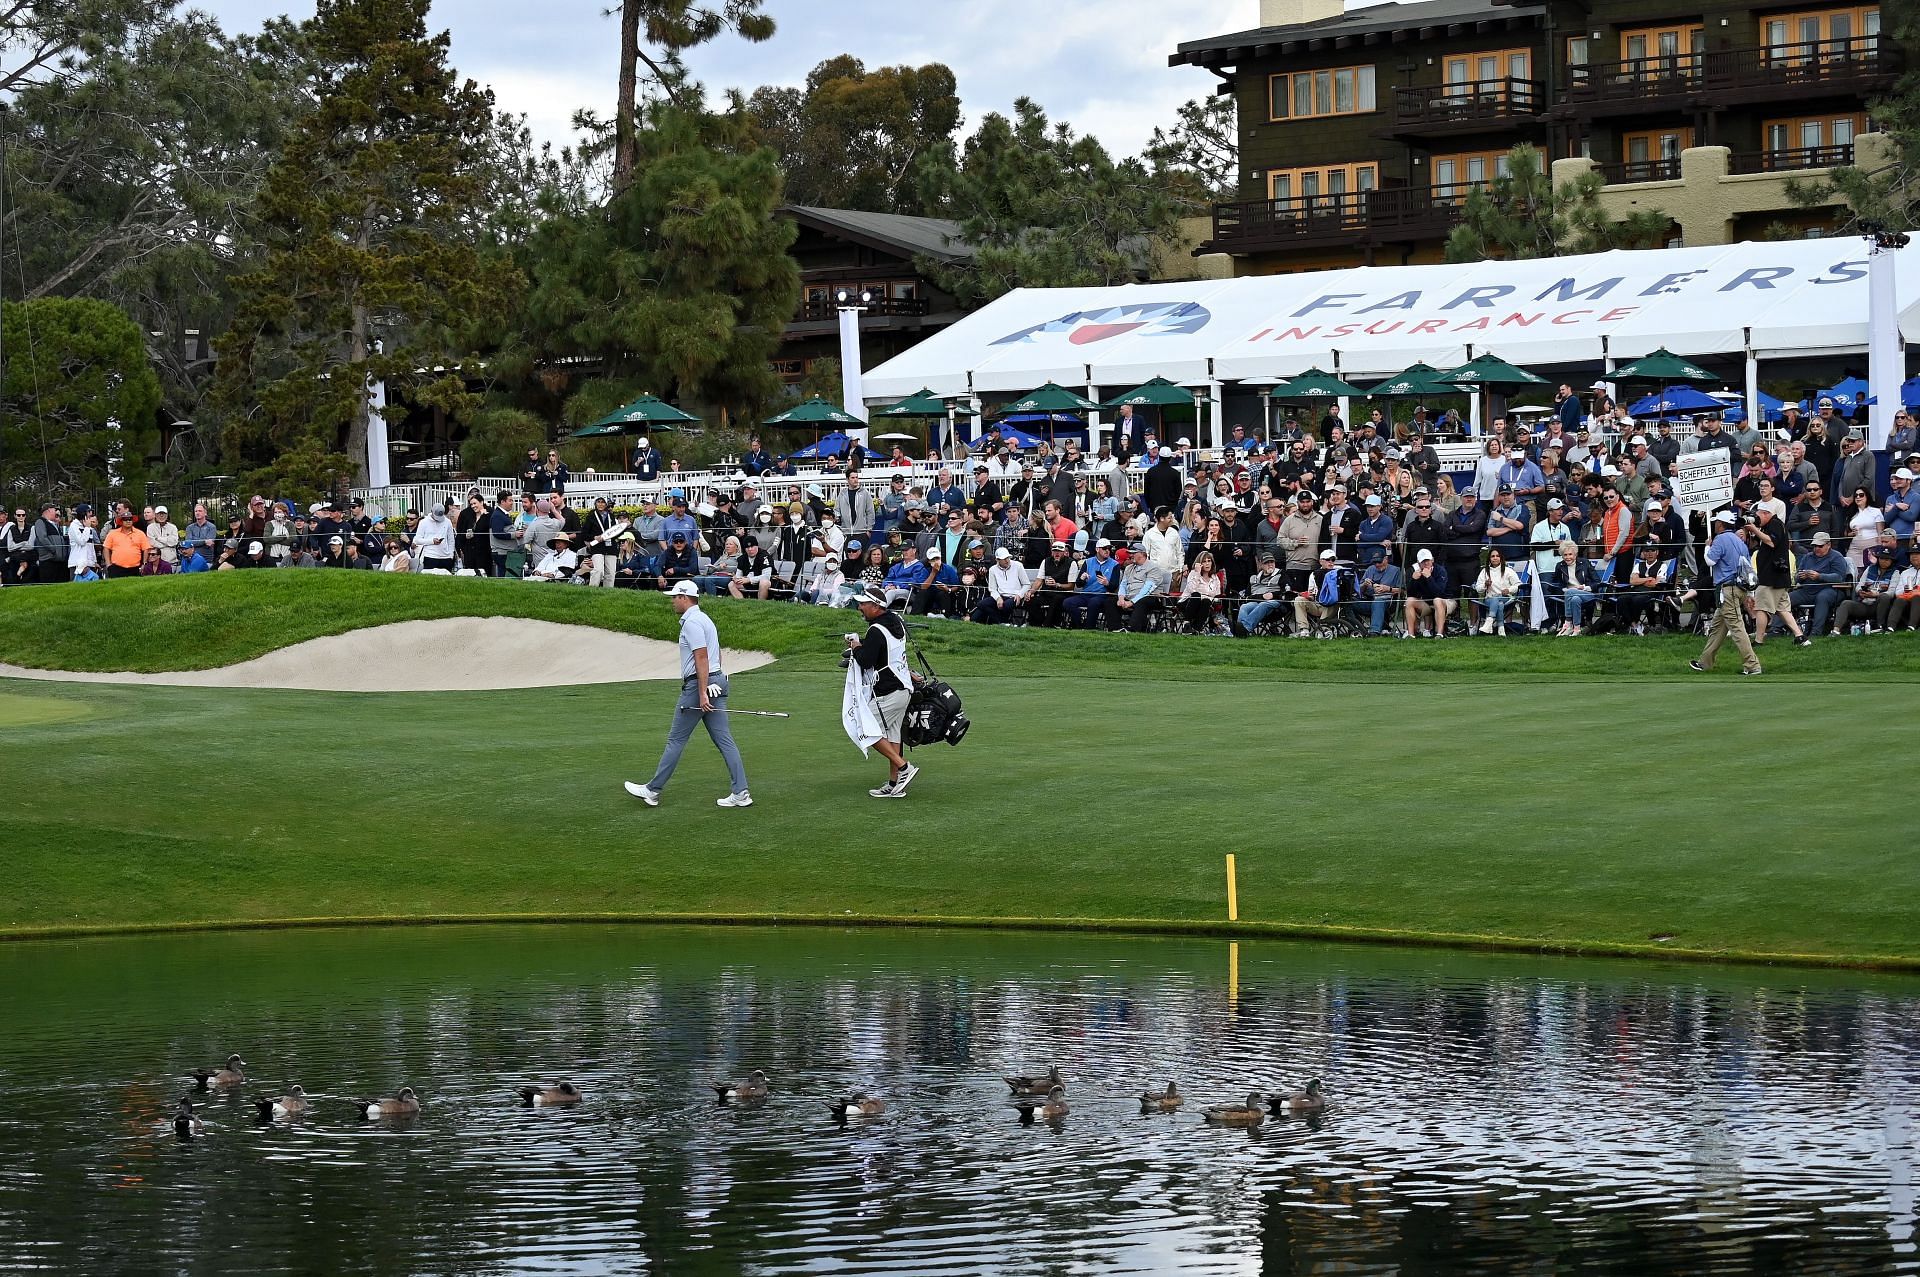 When and where to watch the 2023 Farmers Insurance Open?